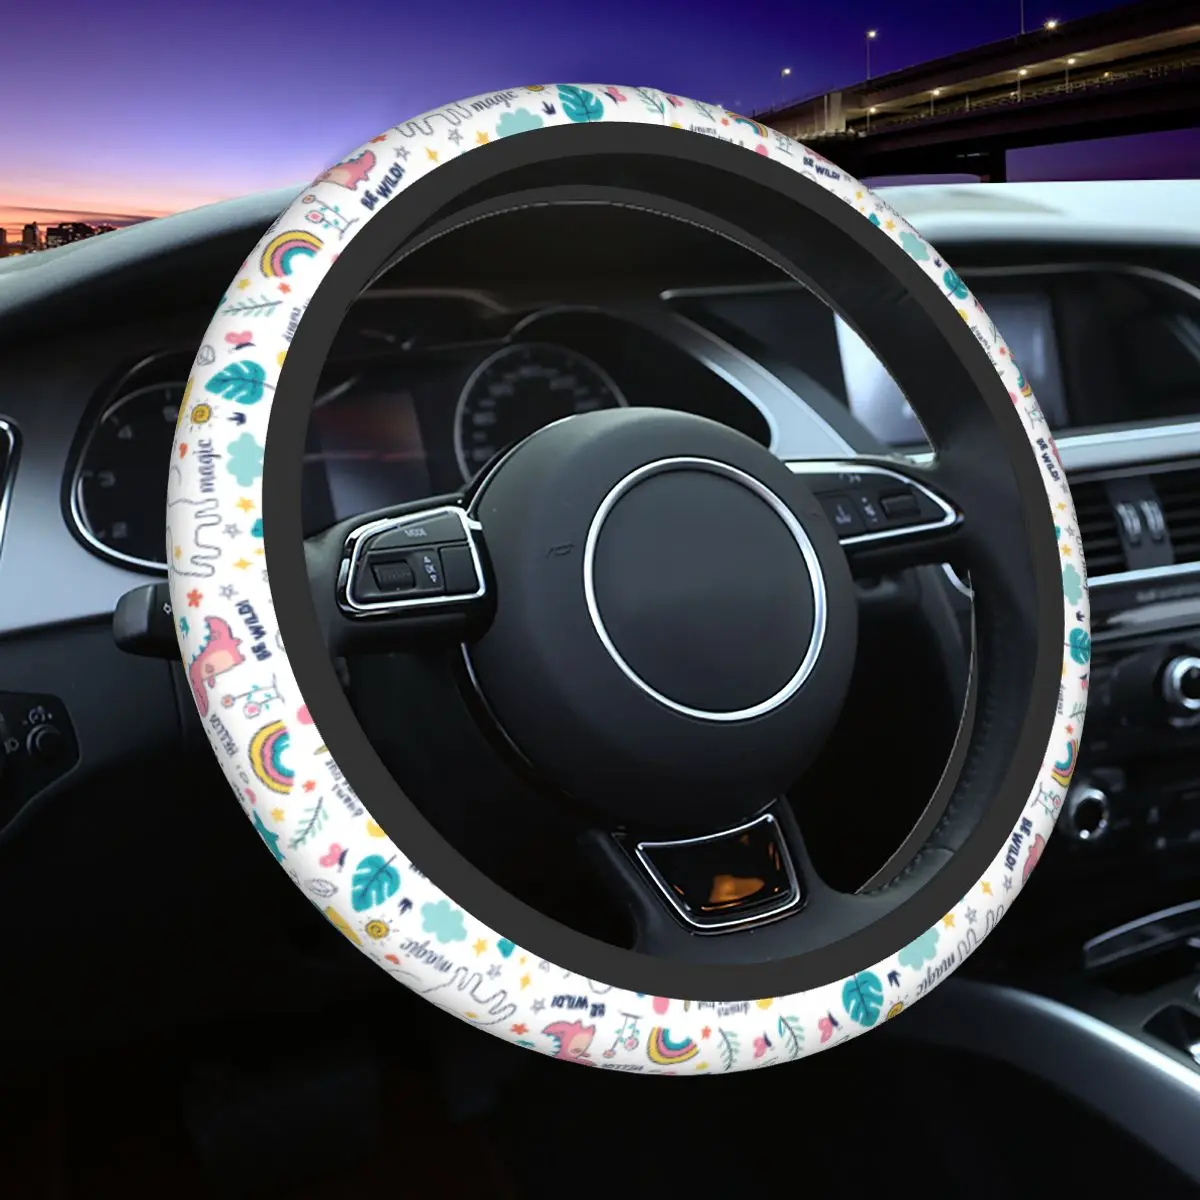 

37-38 Car Steering Wheel Covers Dinosaur Animal Soft Cute Braid On The Steering Wheel Cover Car-styling Colorful Car Accessories